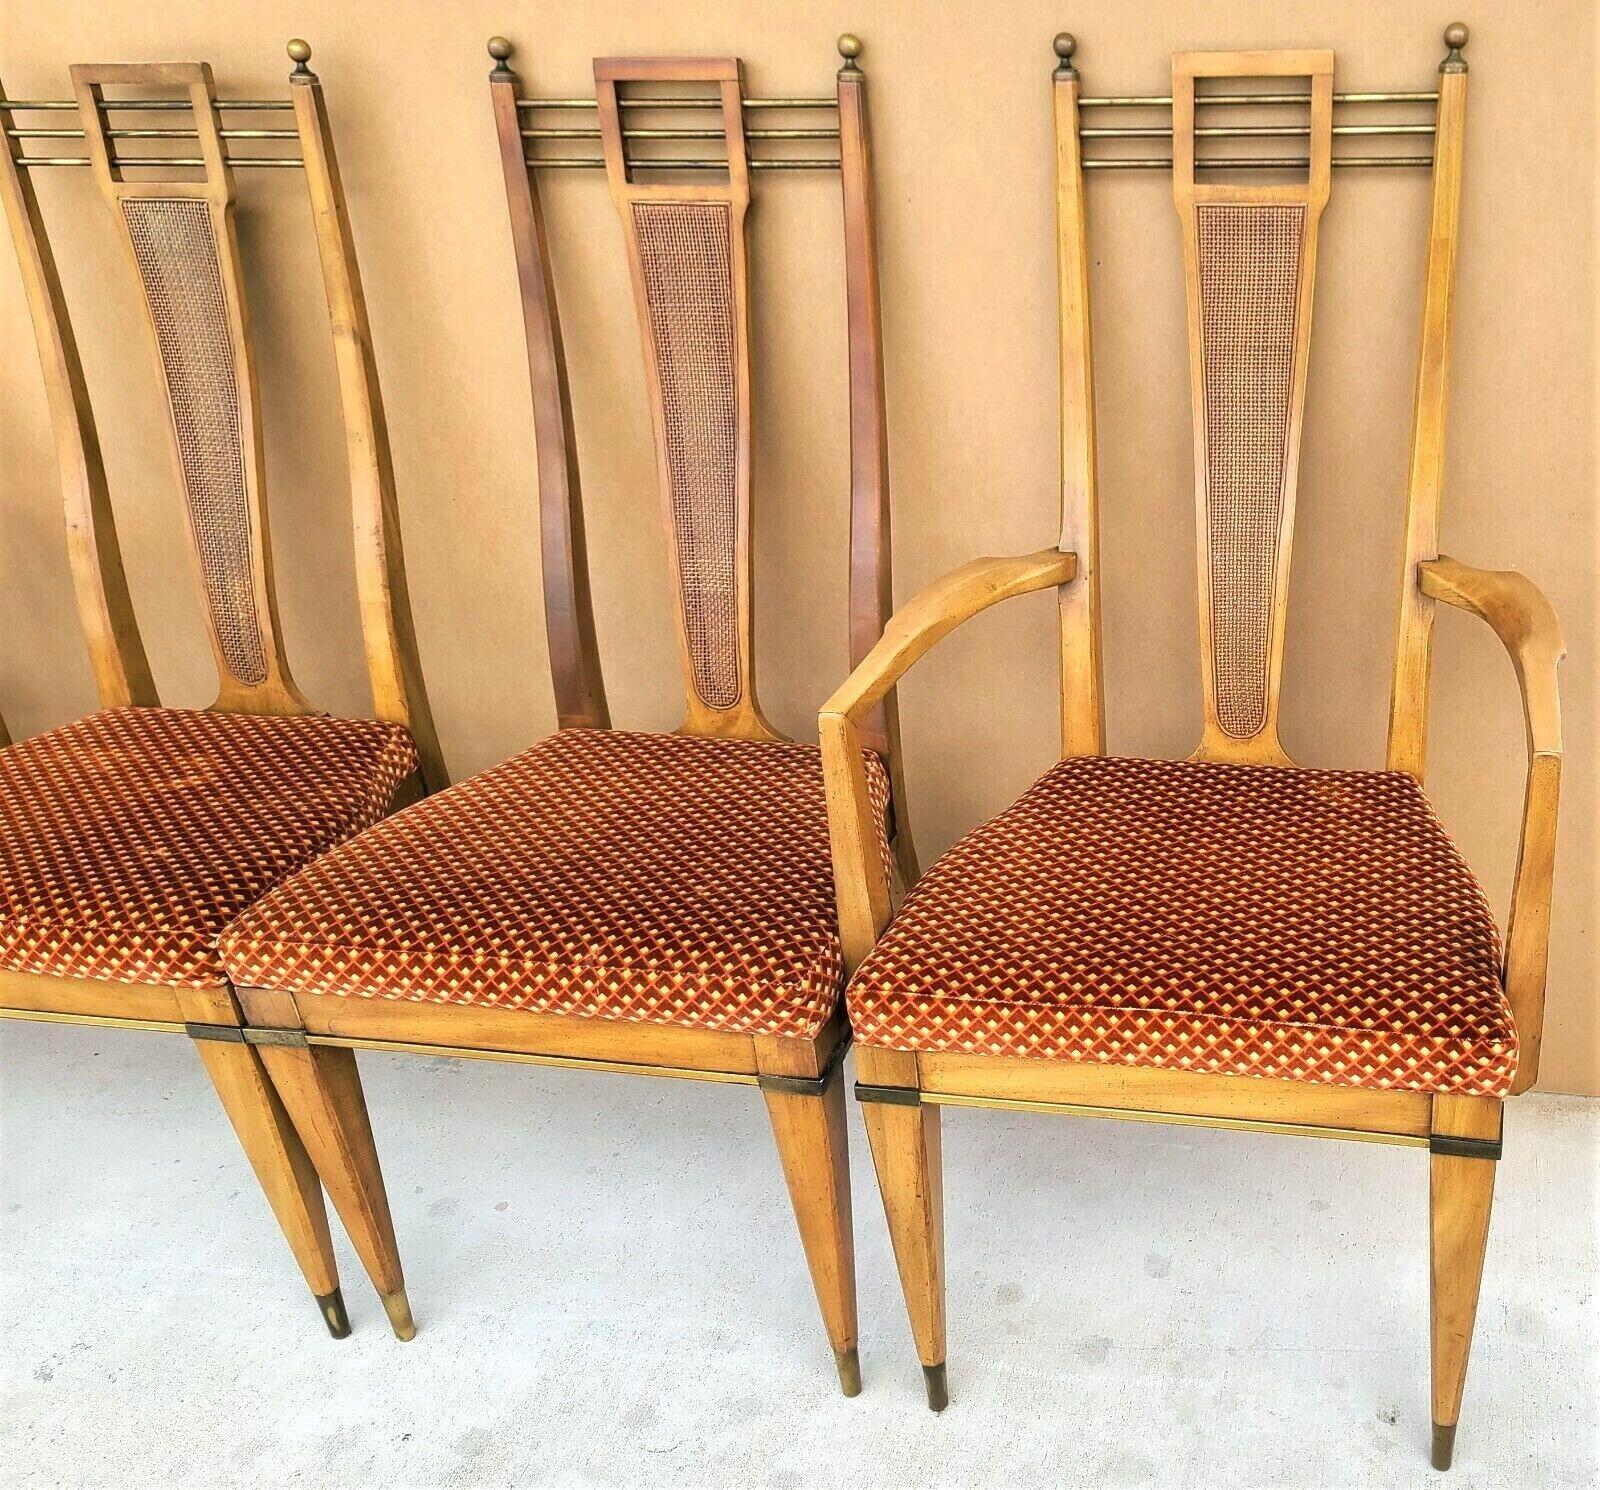 For FULL item description click on CONTINUE READING at the bottom of this page.

Offering One Of Our Recent Palm Beach Estate Fine Furniture Acquisitions Of 
A Set of 4 1950's Mid Century Modern J L Metz Brass, Solid Wood & Cane Dining